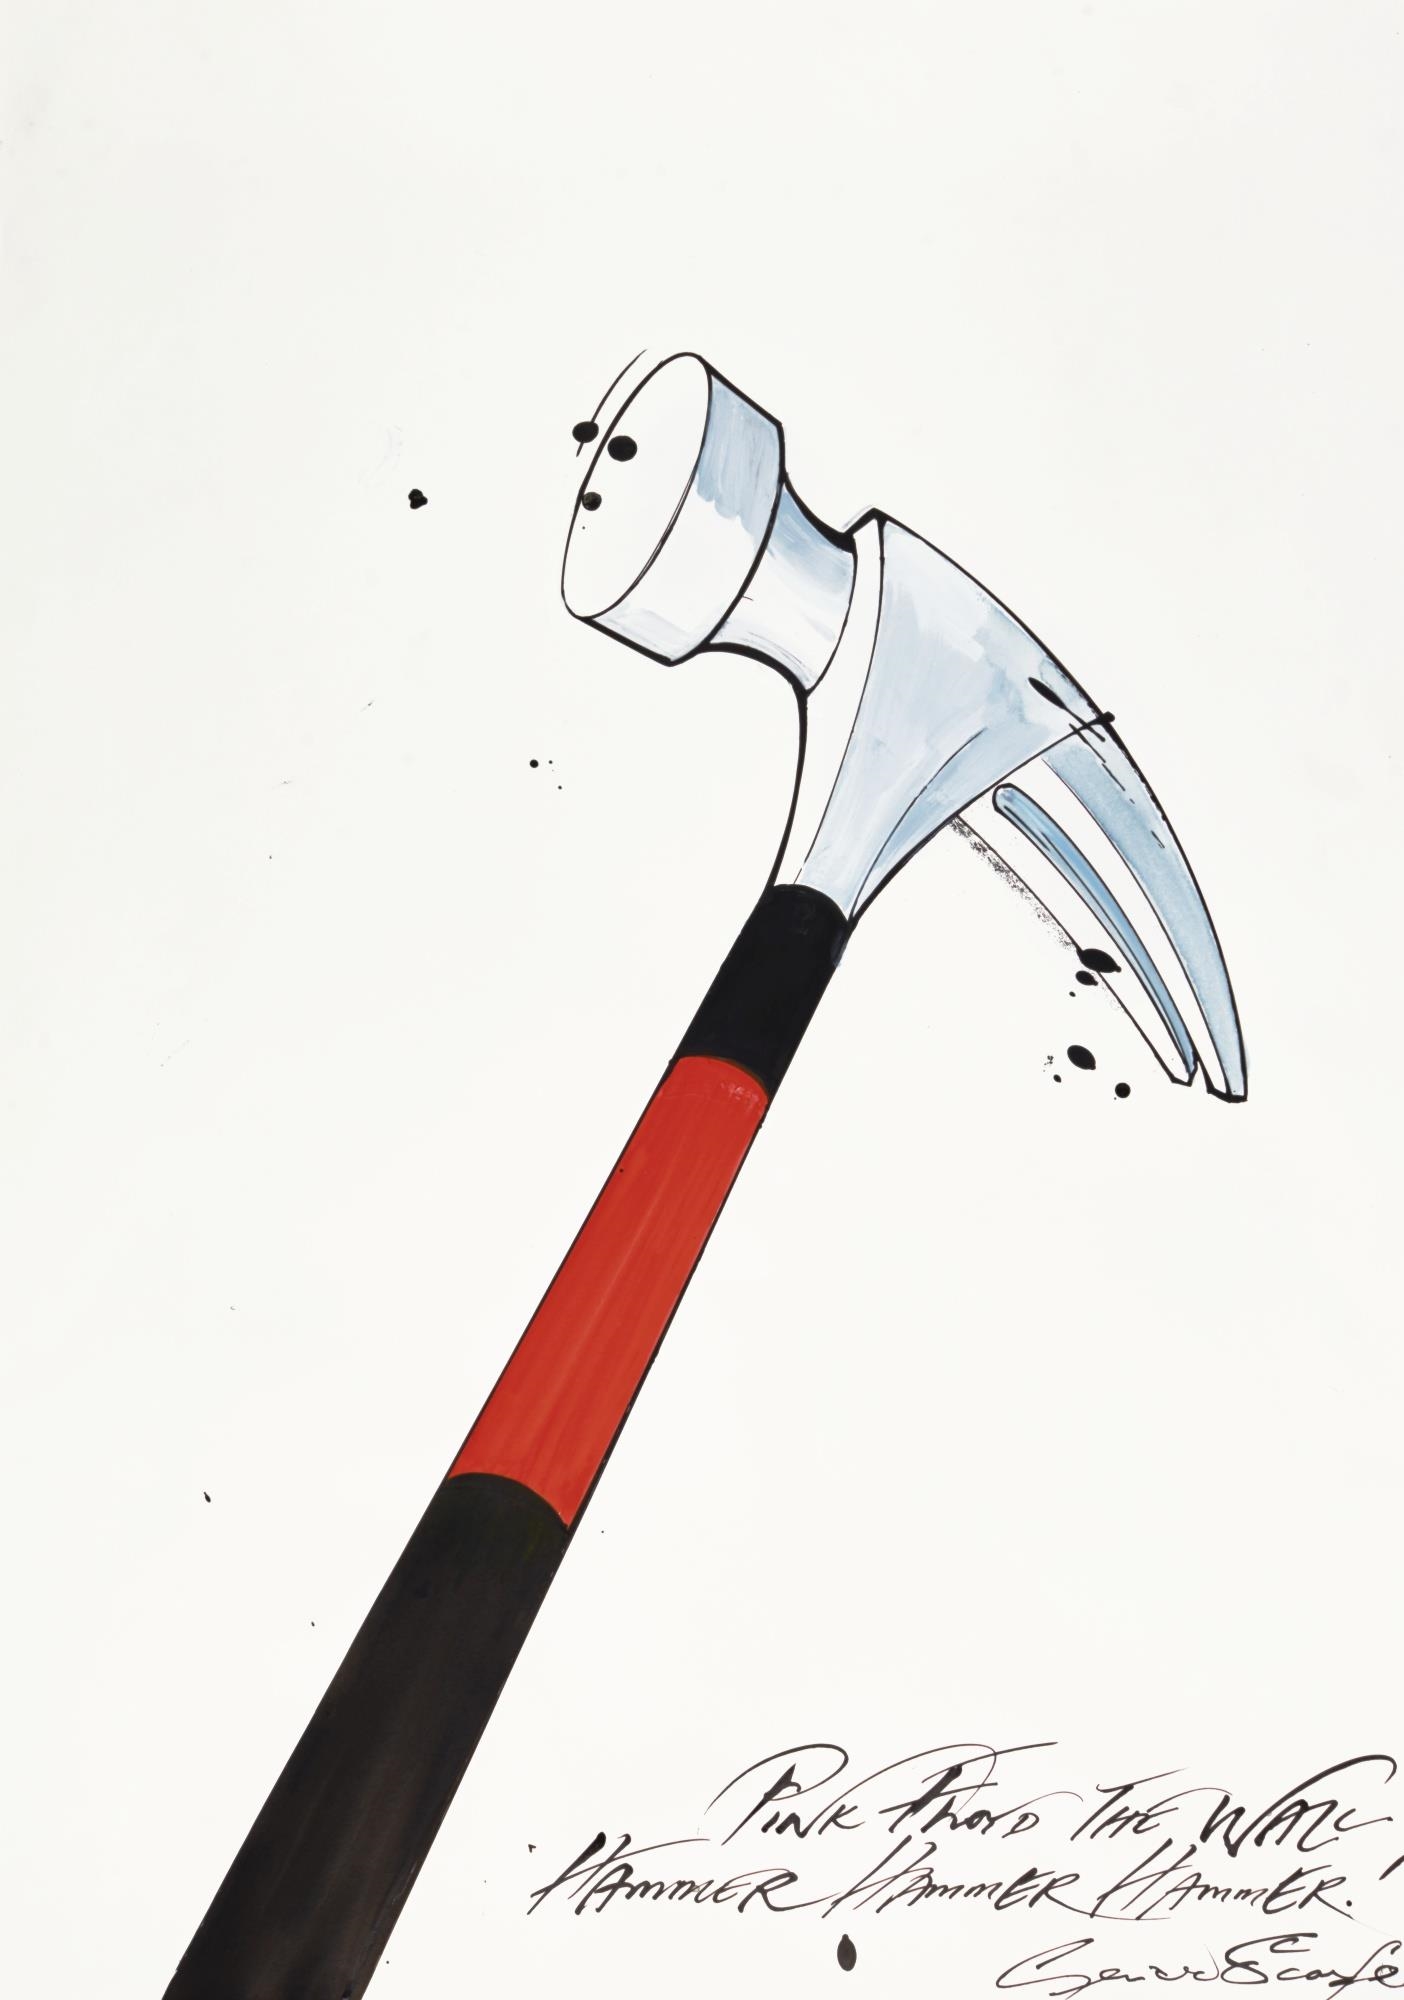 Artwork by Gerald Scarfe, Pink Floyd the Wall Hammer Hammer Hammer!, Made of Pen, ink and watercolour